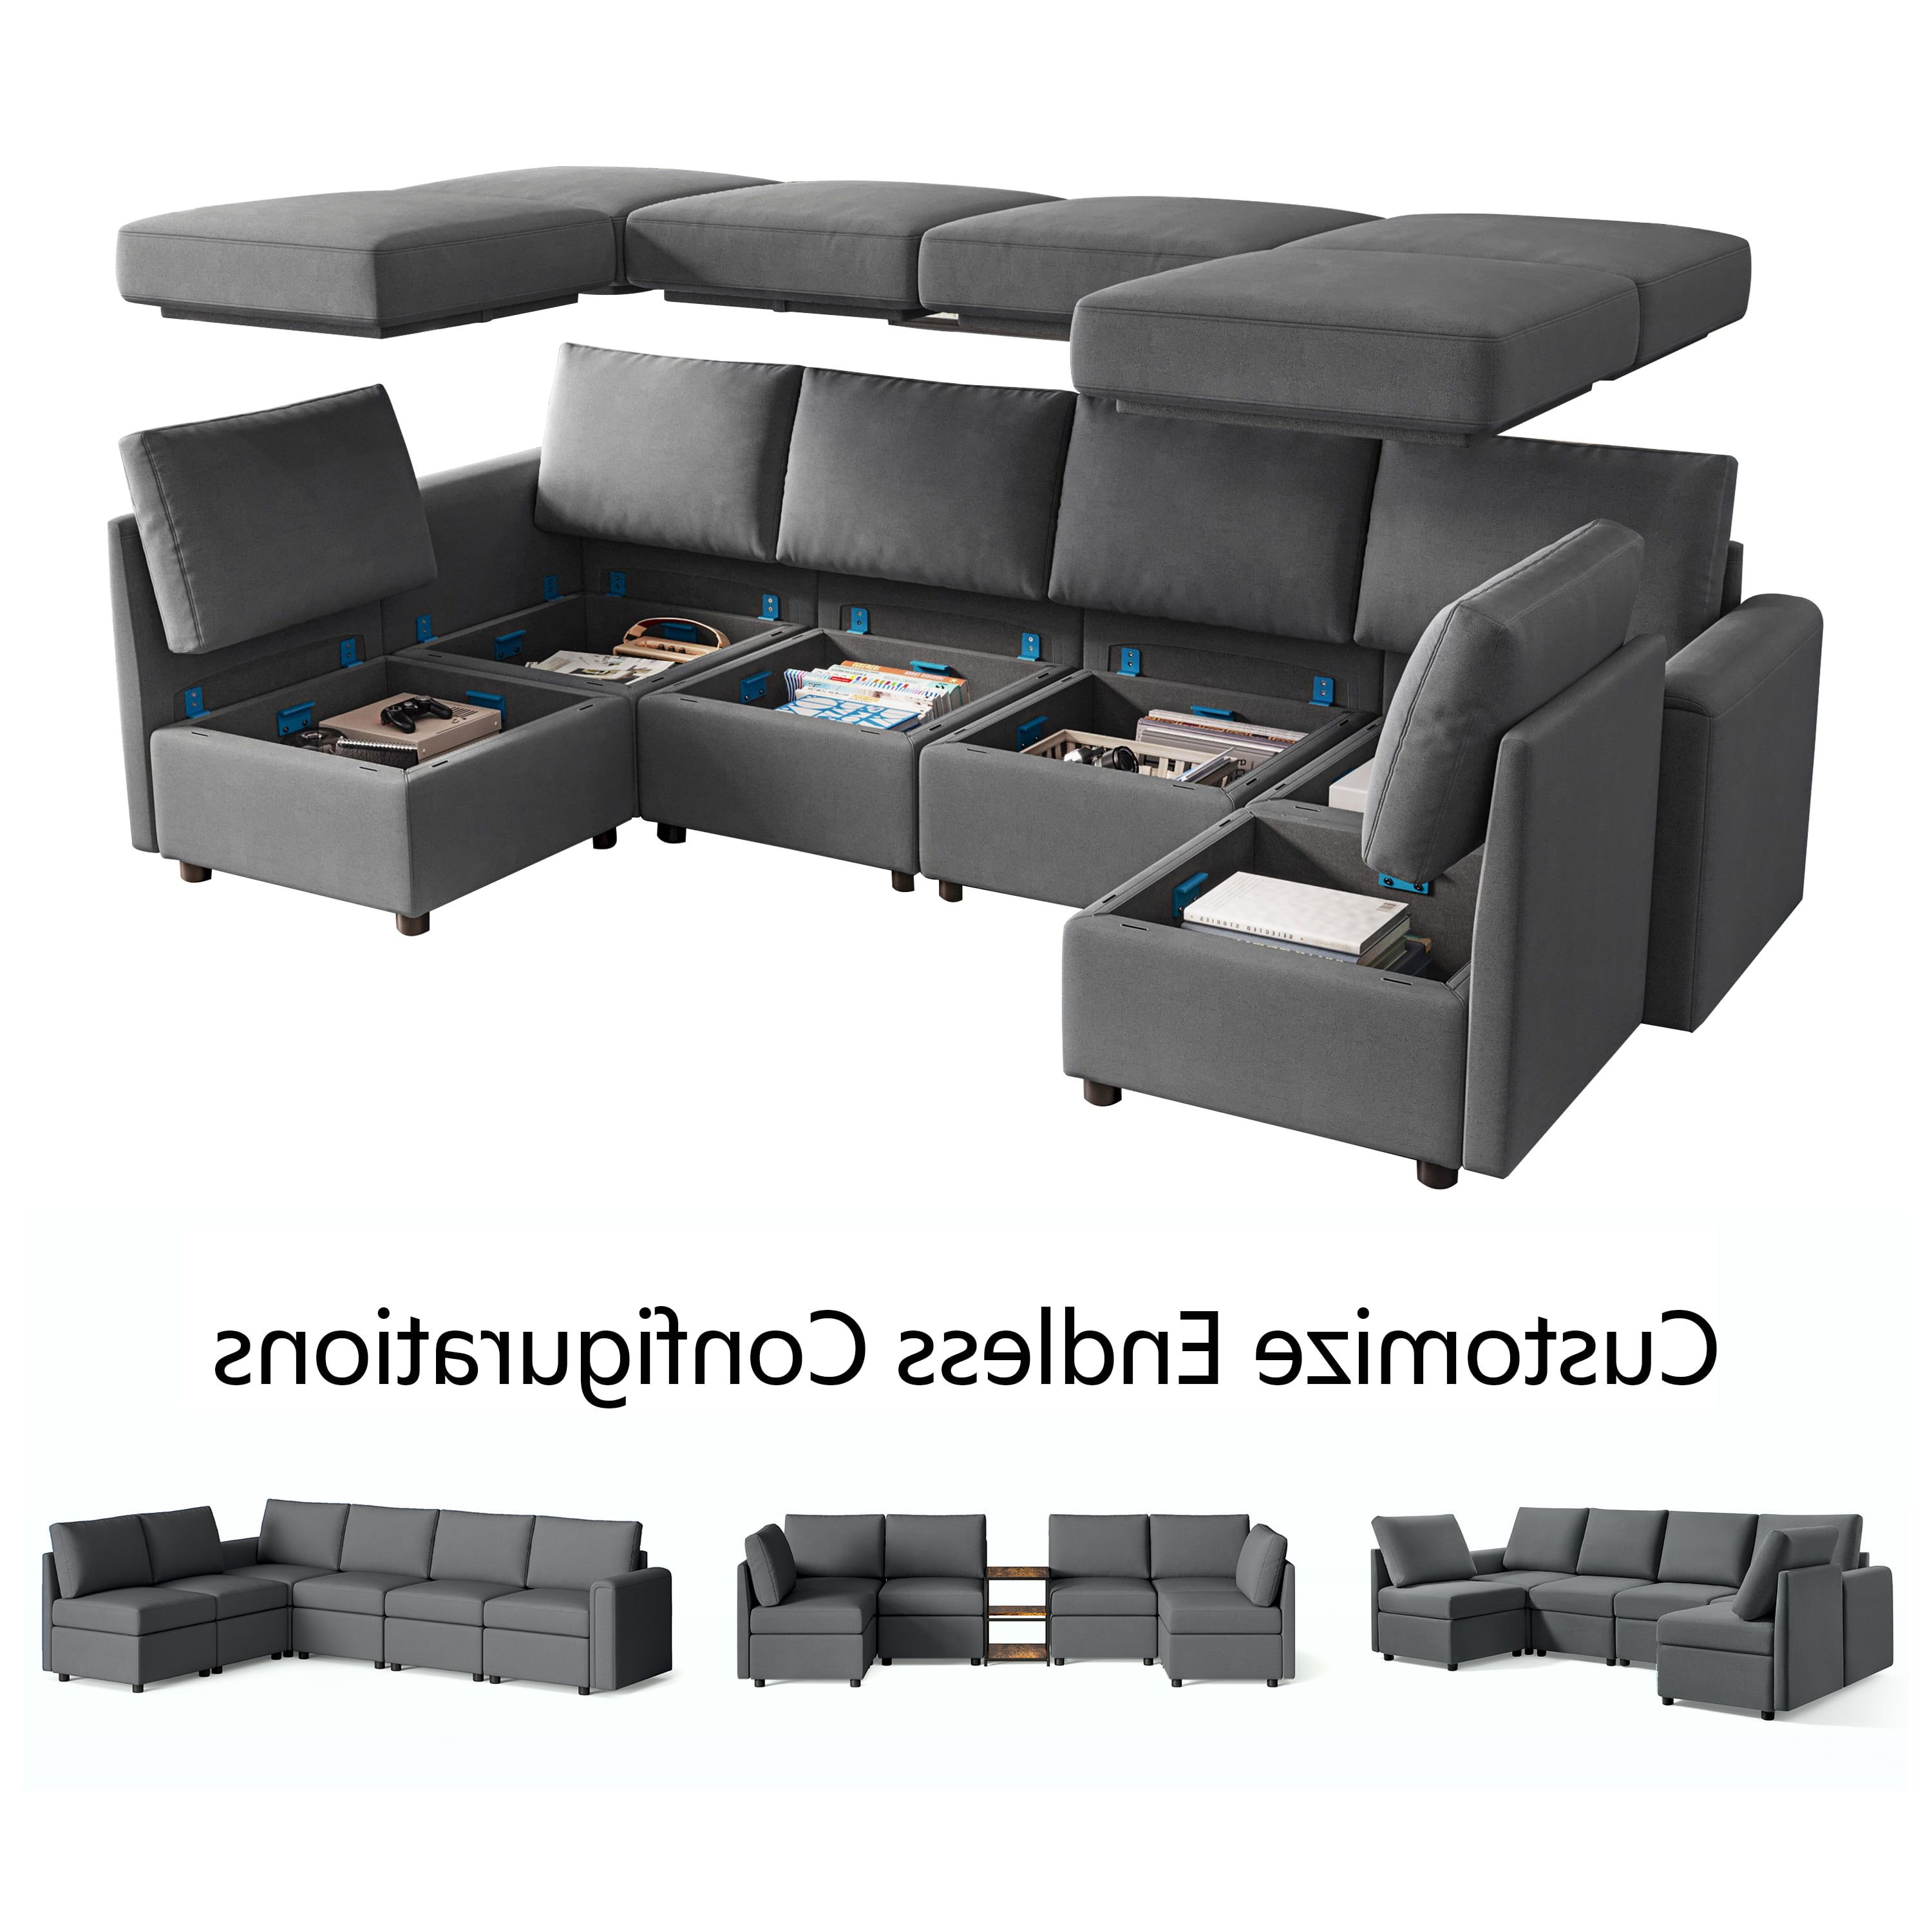 I5.walmartimages/asr/e896aee2 B16a 4784 8cb0 A For Sofa Sectionals With Storage (Gallery 5 of 20)